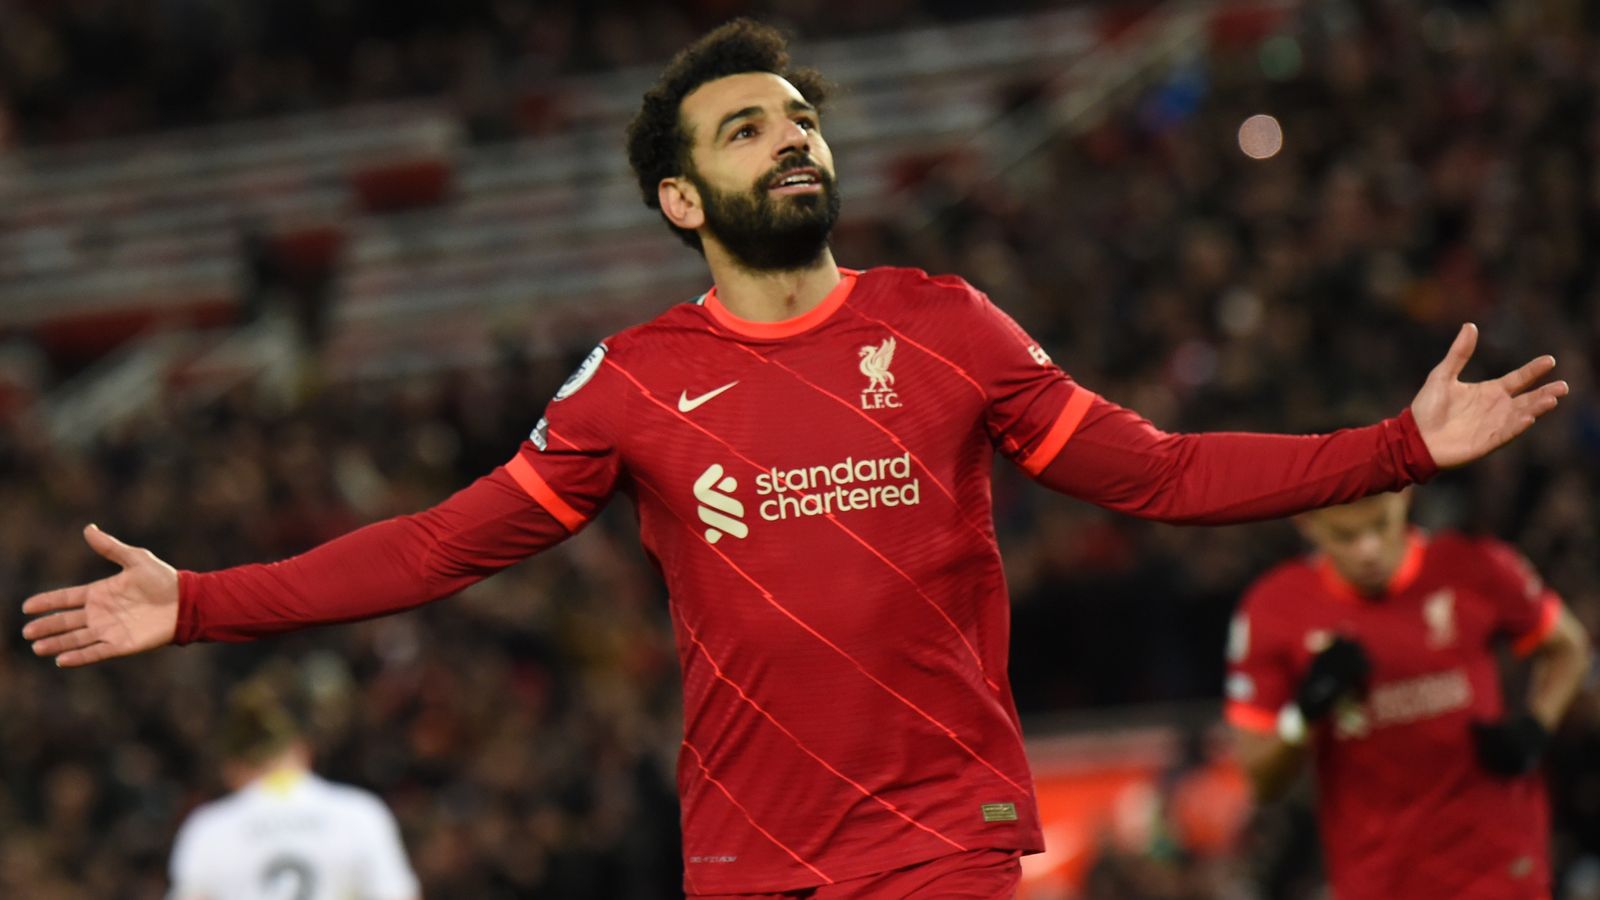 UEFA Champions League Semi-final: Top 5 players to watch out for, Liverpool vs Villarreal LIVE: Giant killers Villarreal all set to upset Anfield in the 1st Leg - Check out